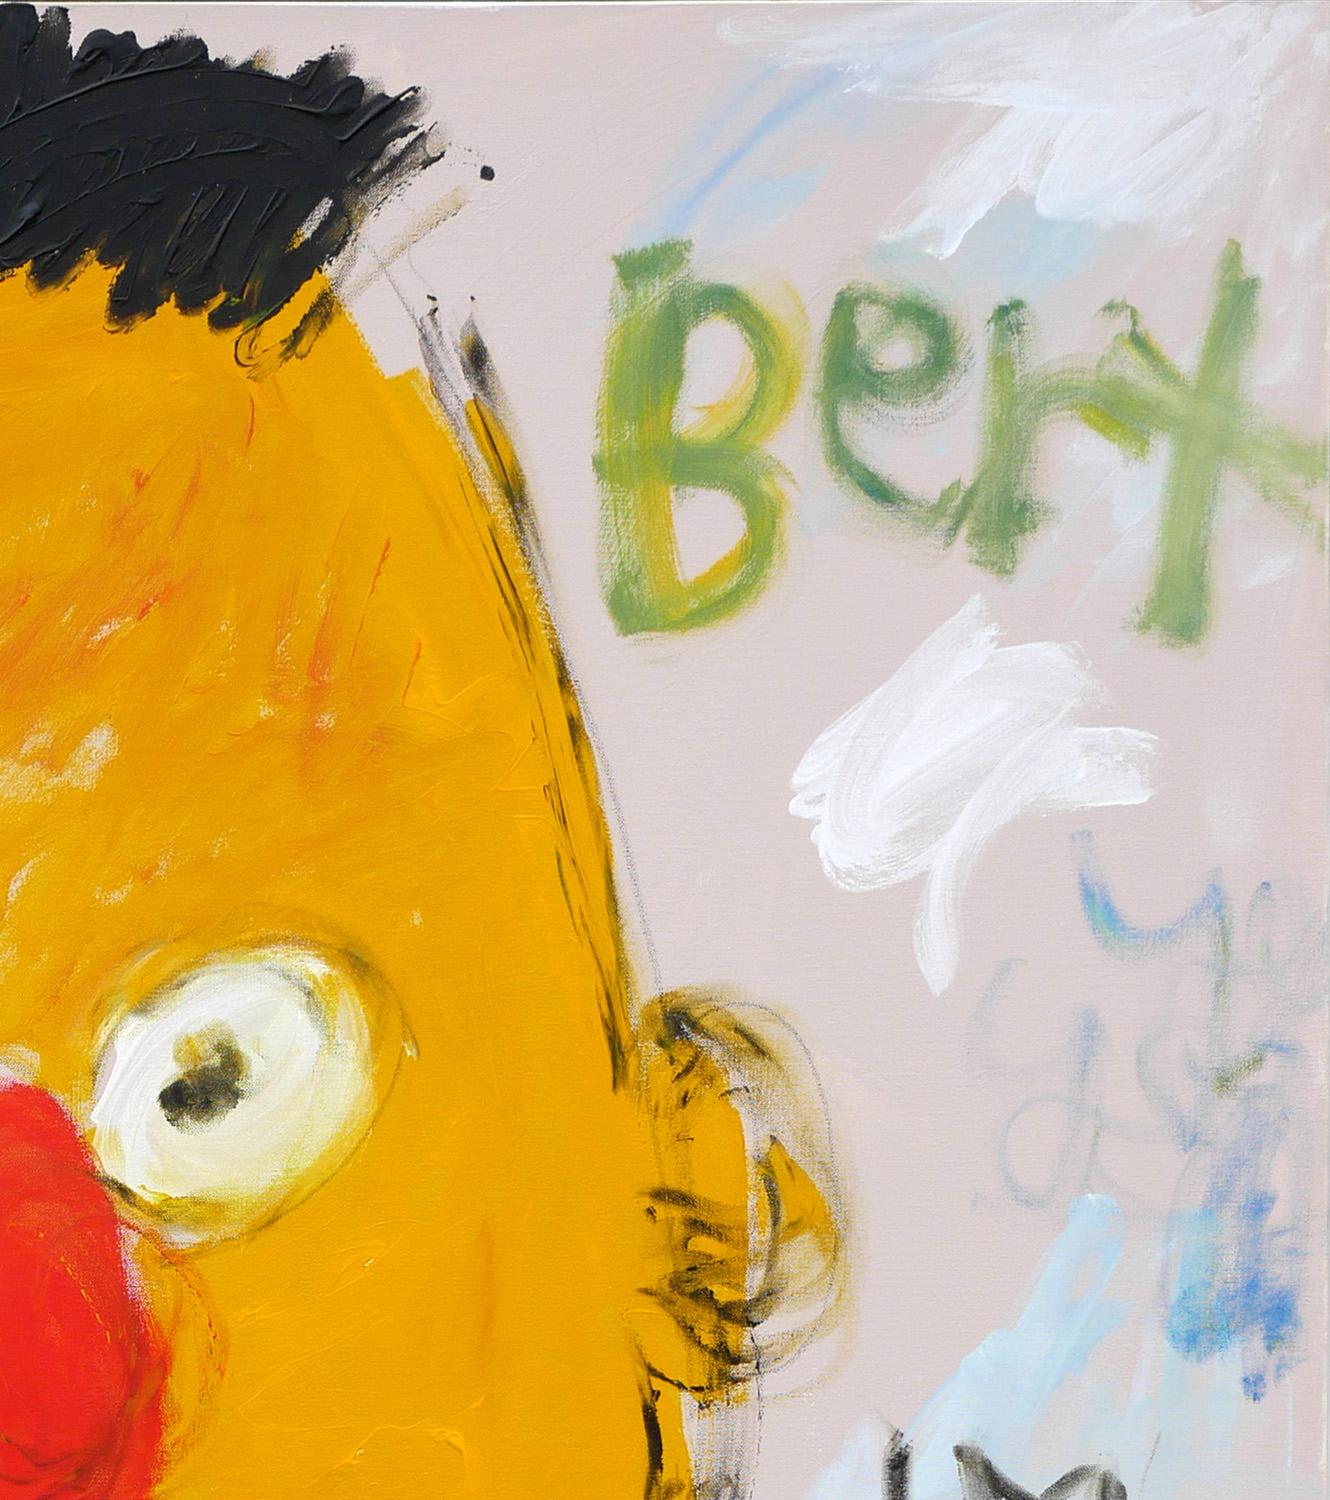 Contemporary pop art painting of iconic Sesame Street character, Bert, by Texas / Mexico based artist Tyler Casey. The work features an abstract yellow toned portrait of Bert dressed in his iconic striped shirt set against a light grey toned